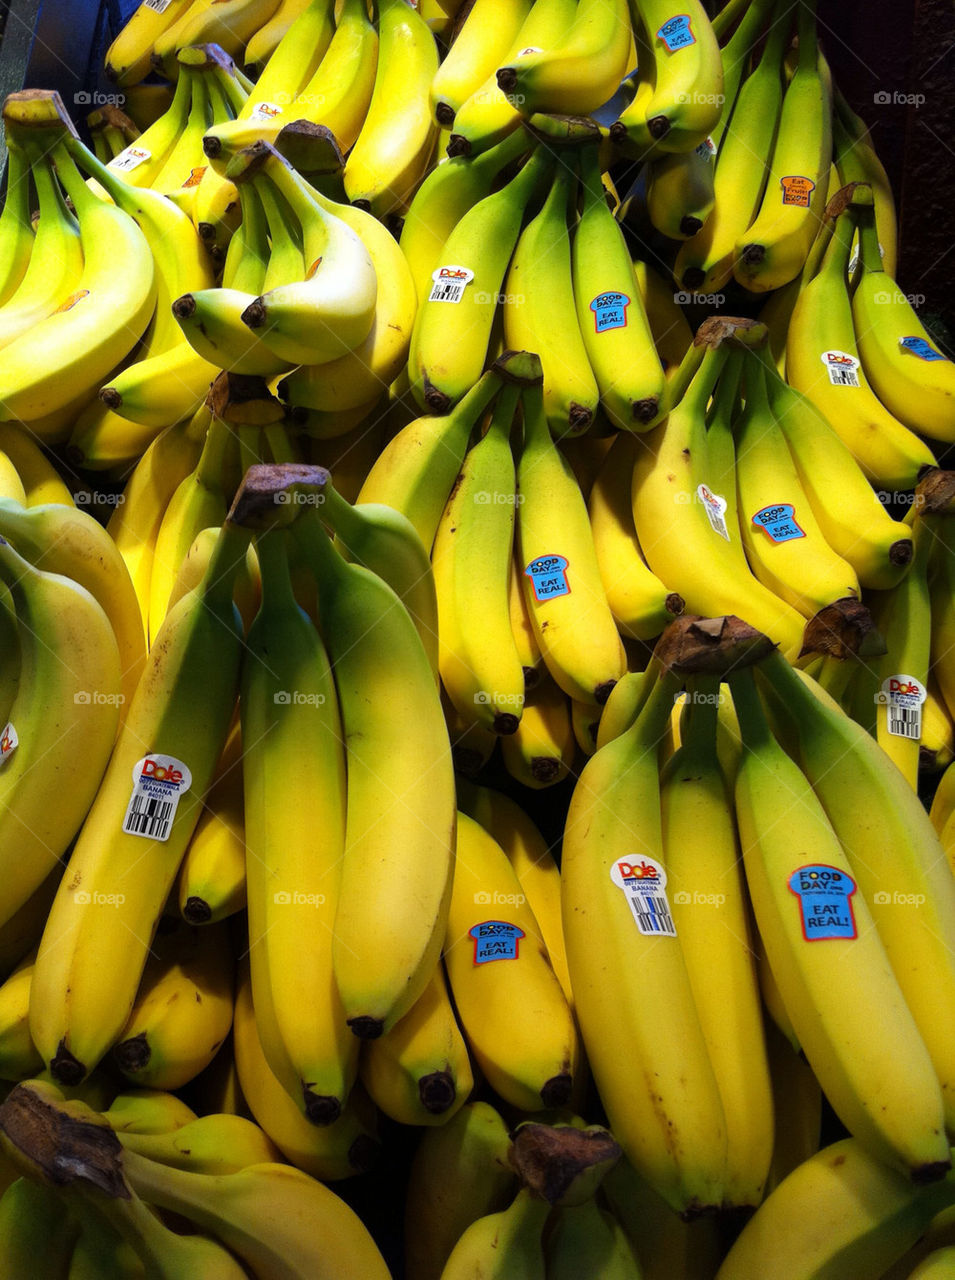 yellow bananas bunches by tplips01